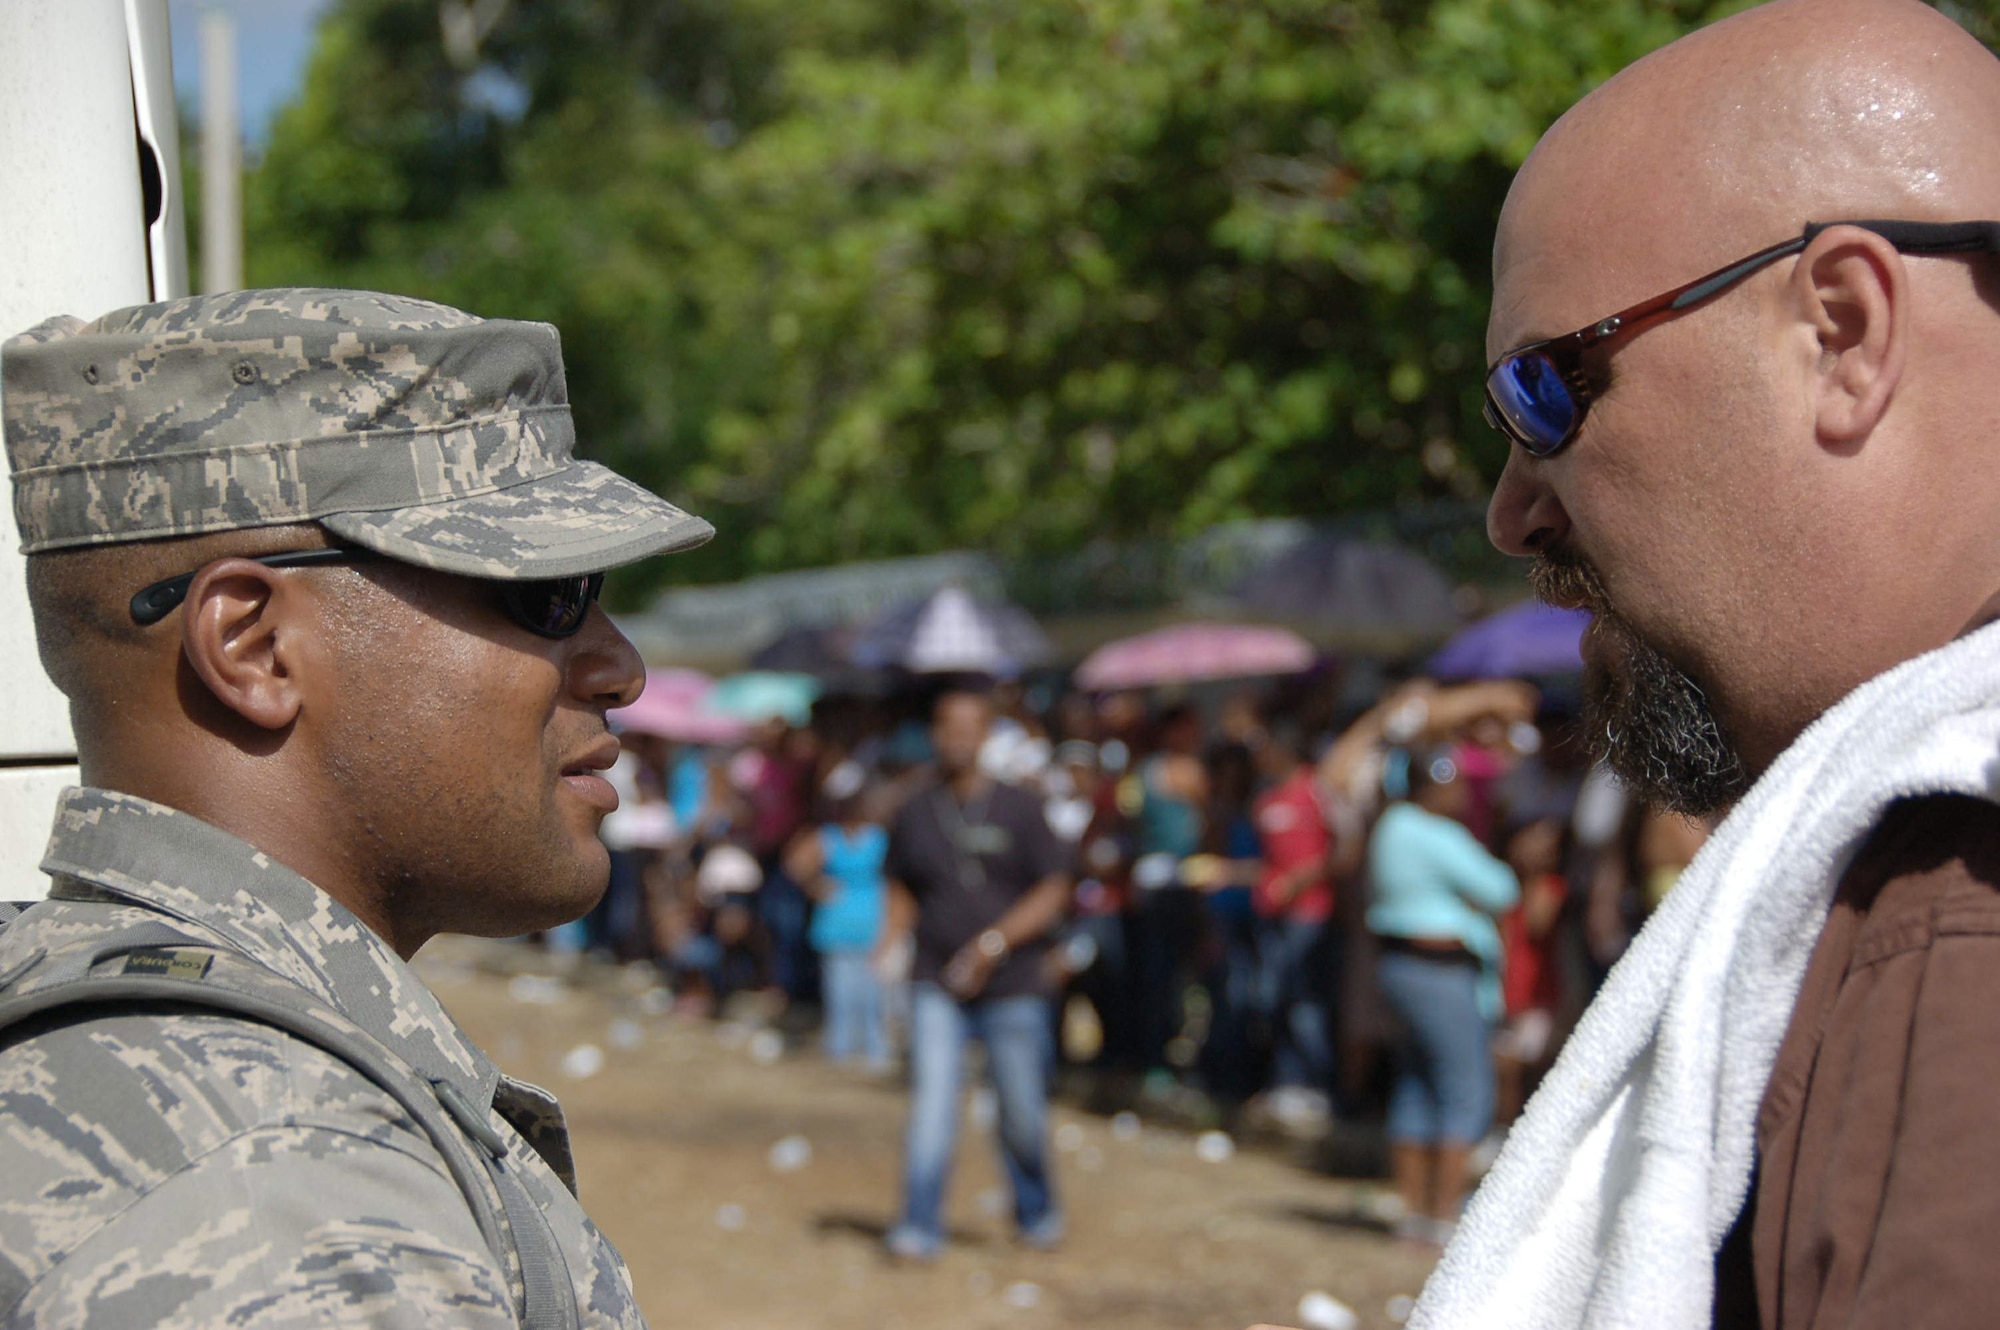 Tech. Sgt. Marcus A. Jackson (left) and John Henry discuss security April 20 as patients line up in the background at a primary school in Hostos, Dom. Rep., during the medical readiness exercise, Beyond the Horizon 2009 - Caribbean.  Mr. Henry is the mission planner of the largest Maxwell Air Force Base-planned MEDRETE to date and Sergeant Jackson is the day shift flight chief with the 42nd Security Forces Squadron at Maxwell AFB.  (U.S. Air Force photo/Capt. Ben Sakrisson) 
